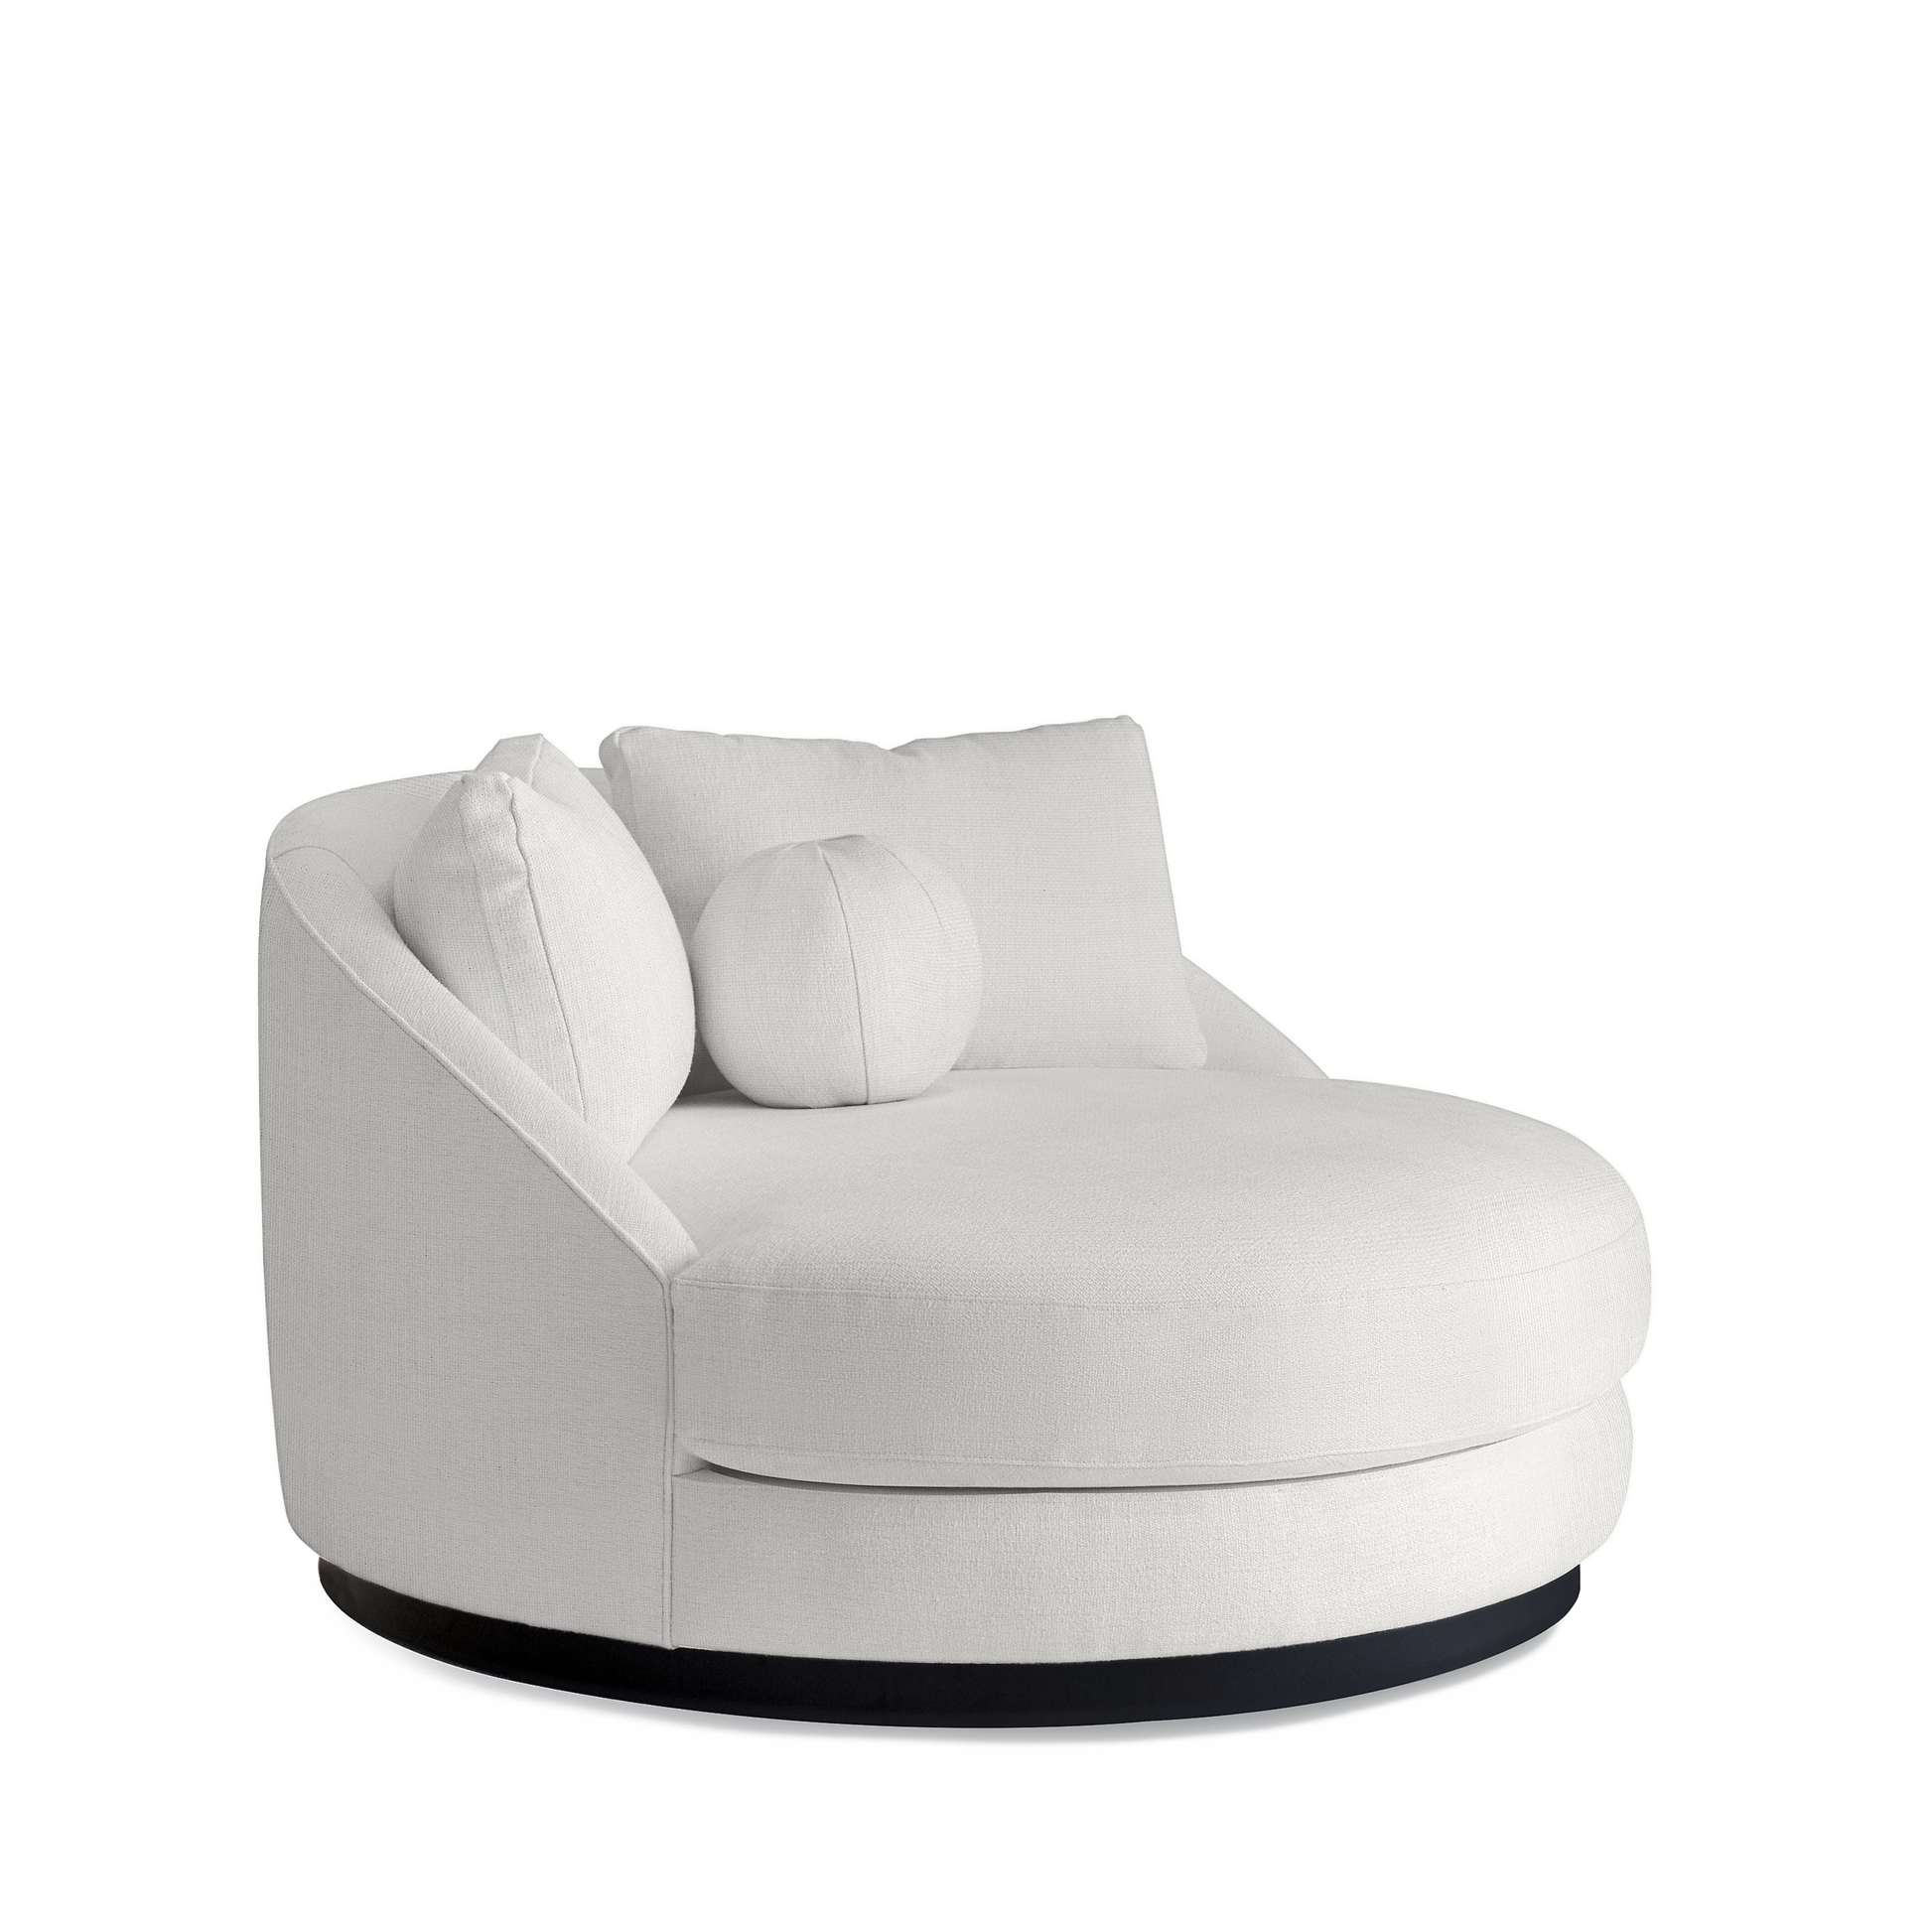 SIESTA Lounge Bed with rocco white textile 